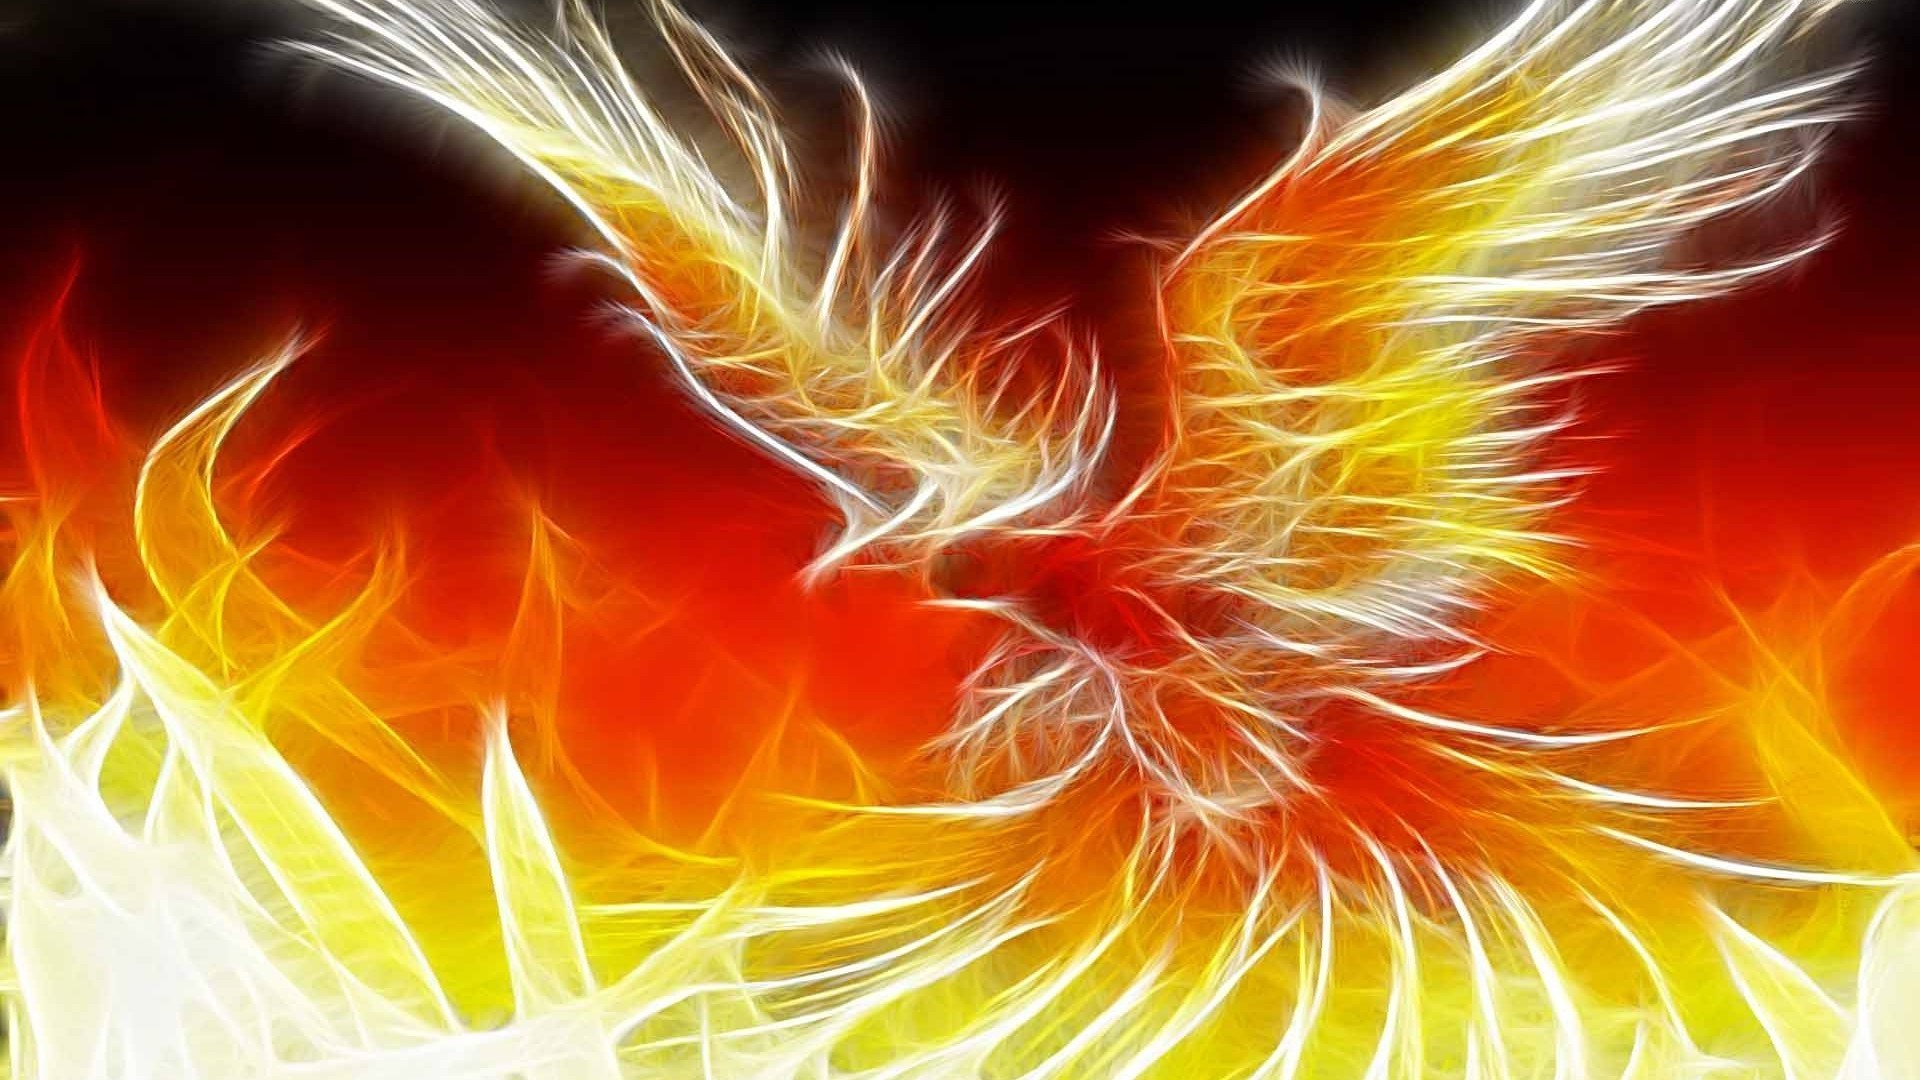 Wallpaper Phoenix with resolution 1920X1080 pixel. You can use this wallpaper as background for your desktop Computer Screensavers, Android or iPhone smartphones